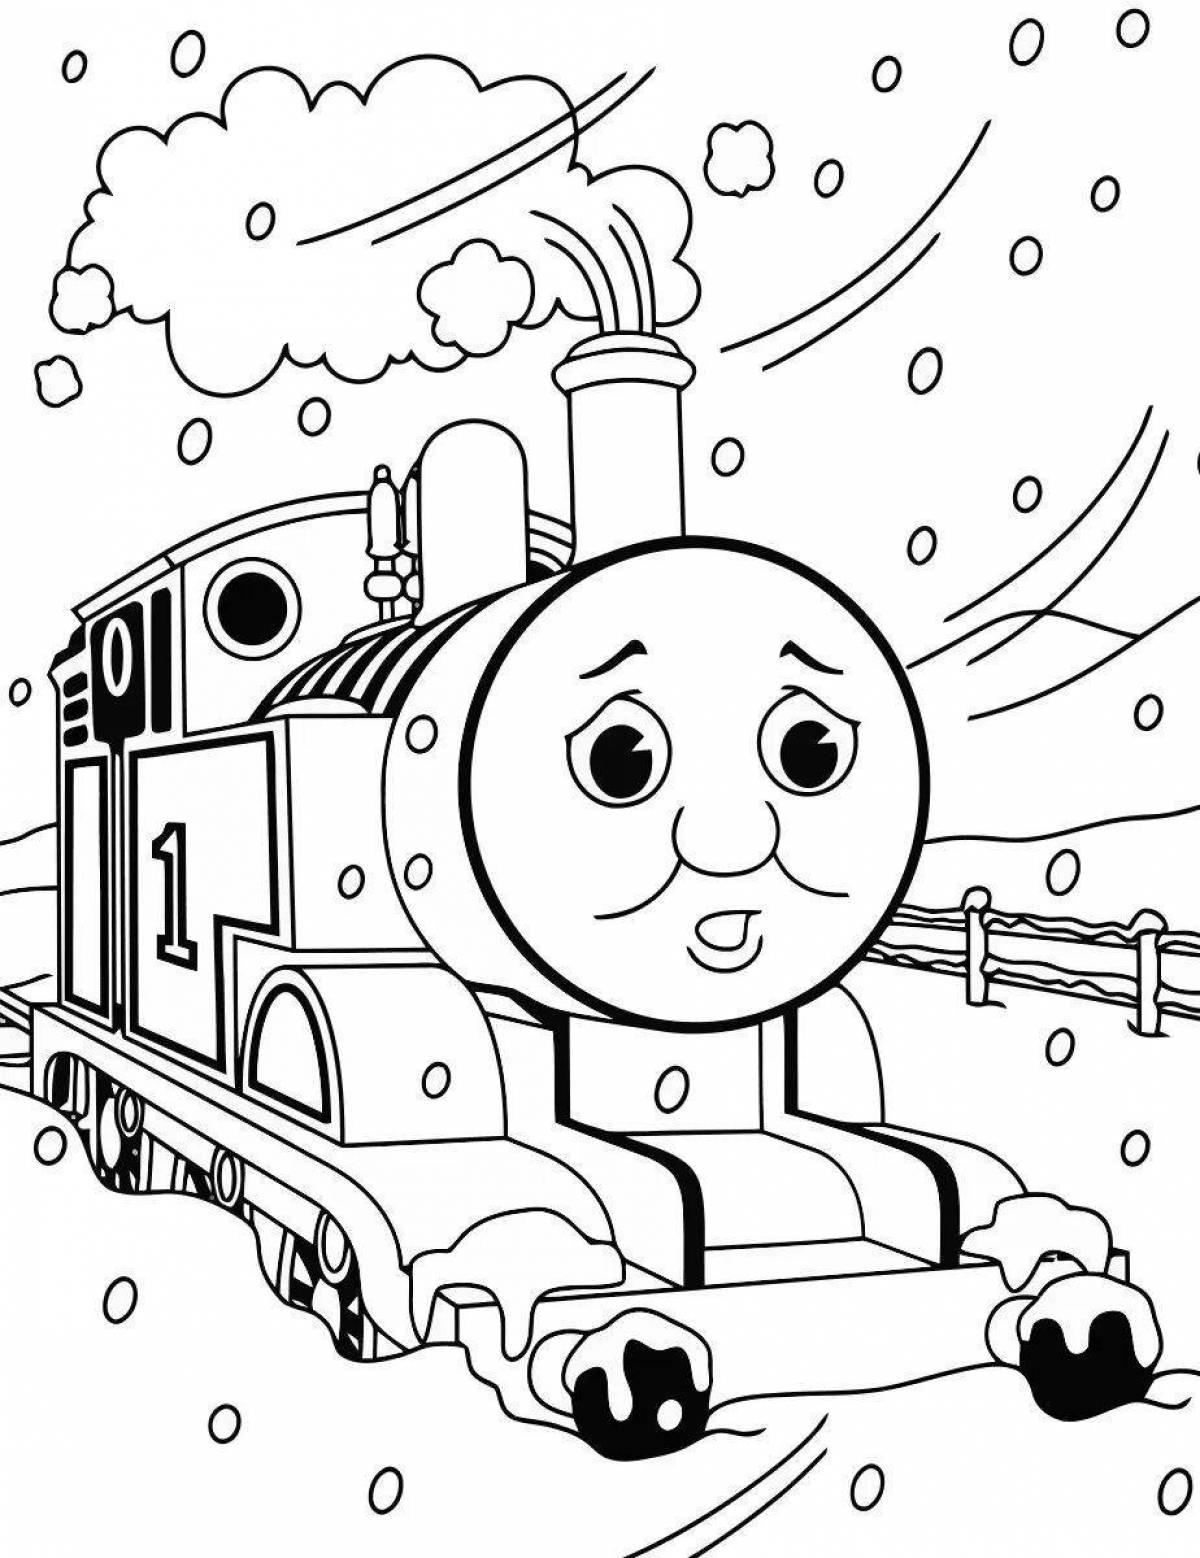 Witty thomas train coloring book